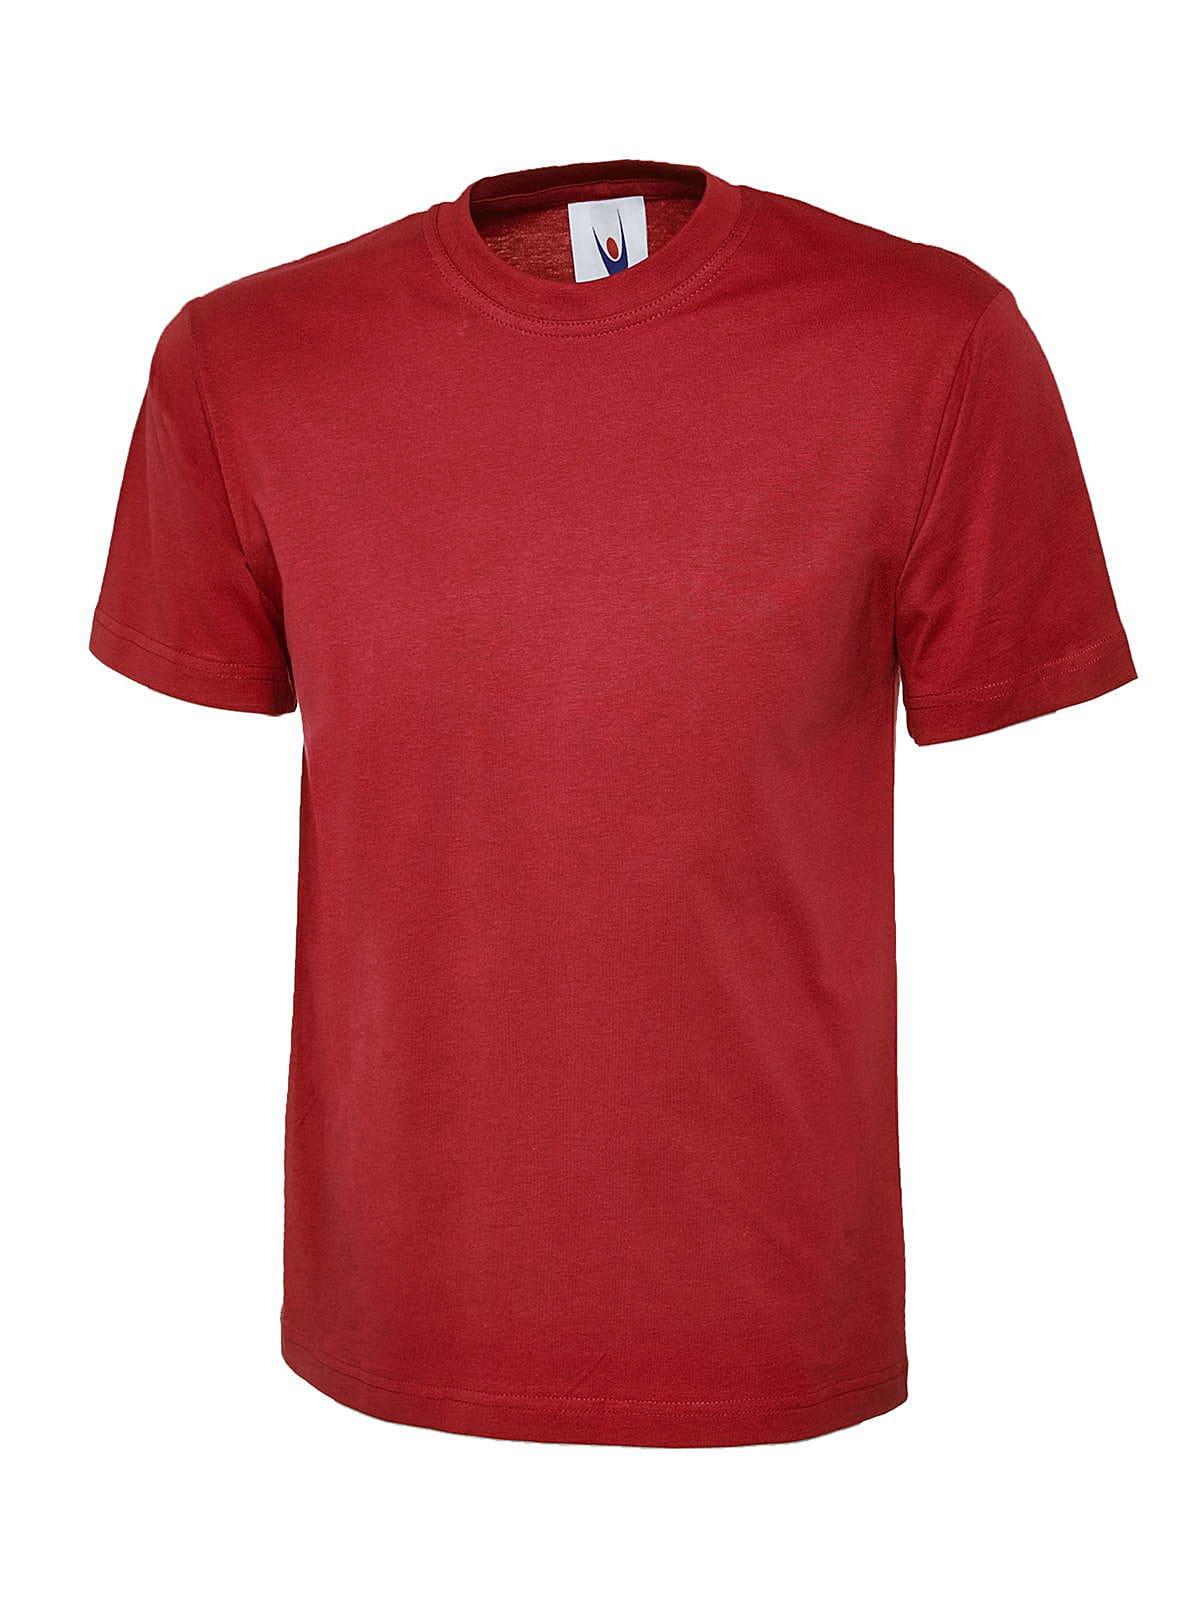 Uneek Childrens 180GSM T-Shirt in Red (Product Code: UC306)